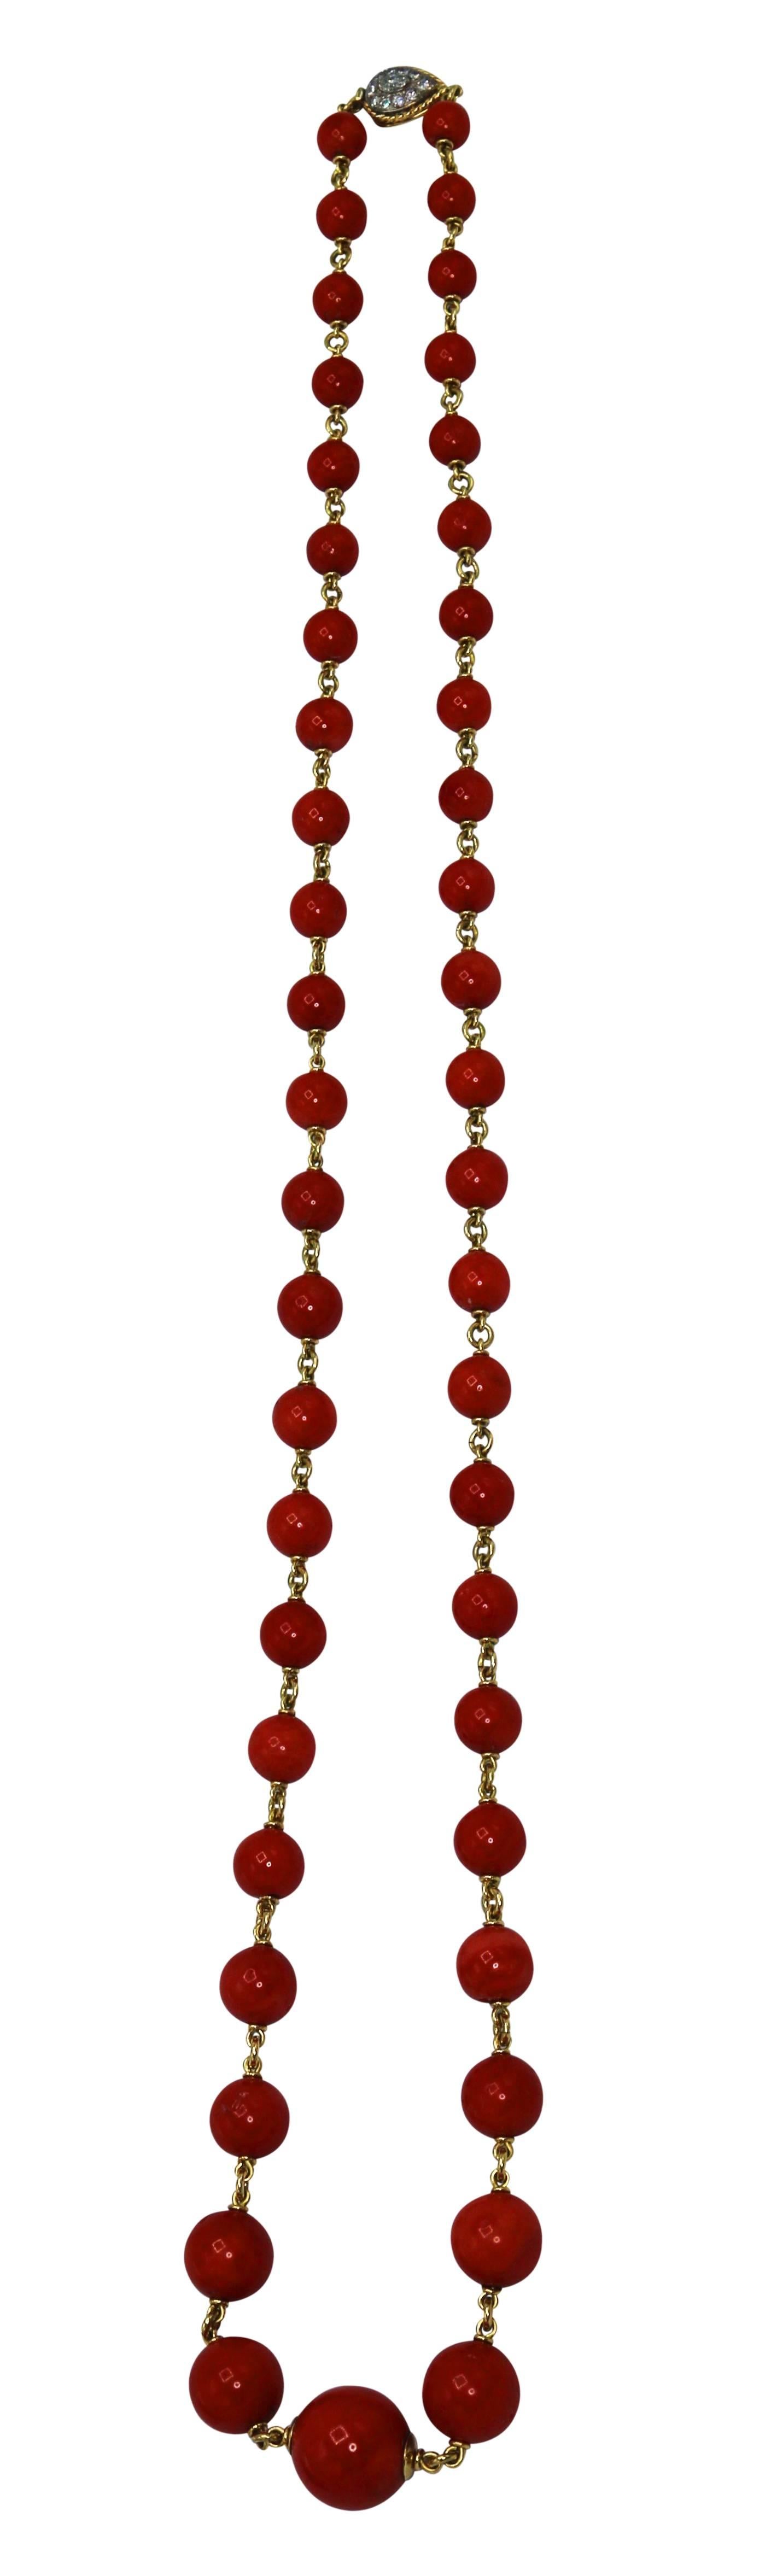 The graduated long chain necklace composed of numerous coral beads of rich red hue measuring 9.5 to 17.8 mm., spaced by gold links, completed by a pear-shaped clasp set with small round diamonds weighing approximately 0.80 carat, gross weight 112.0